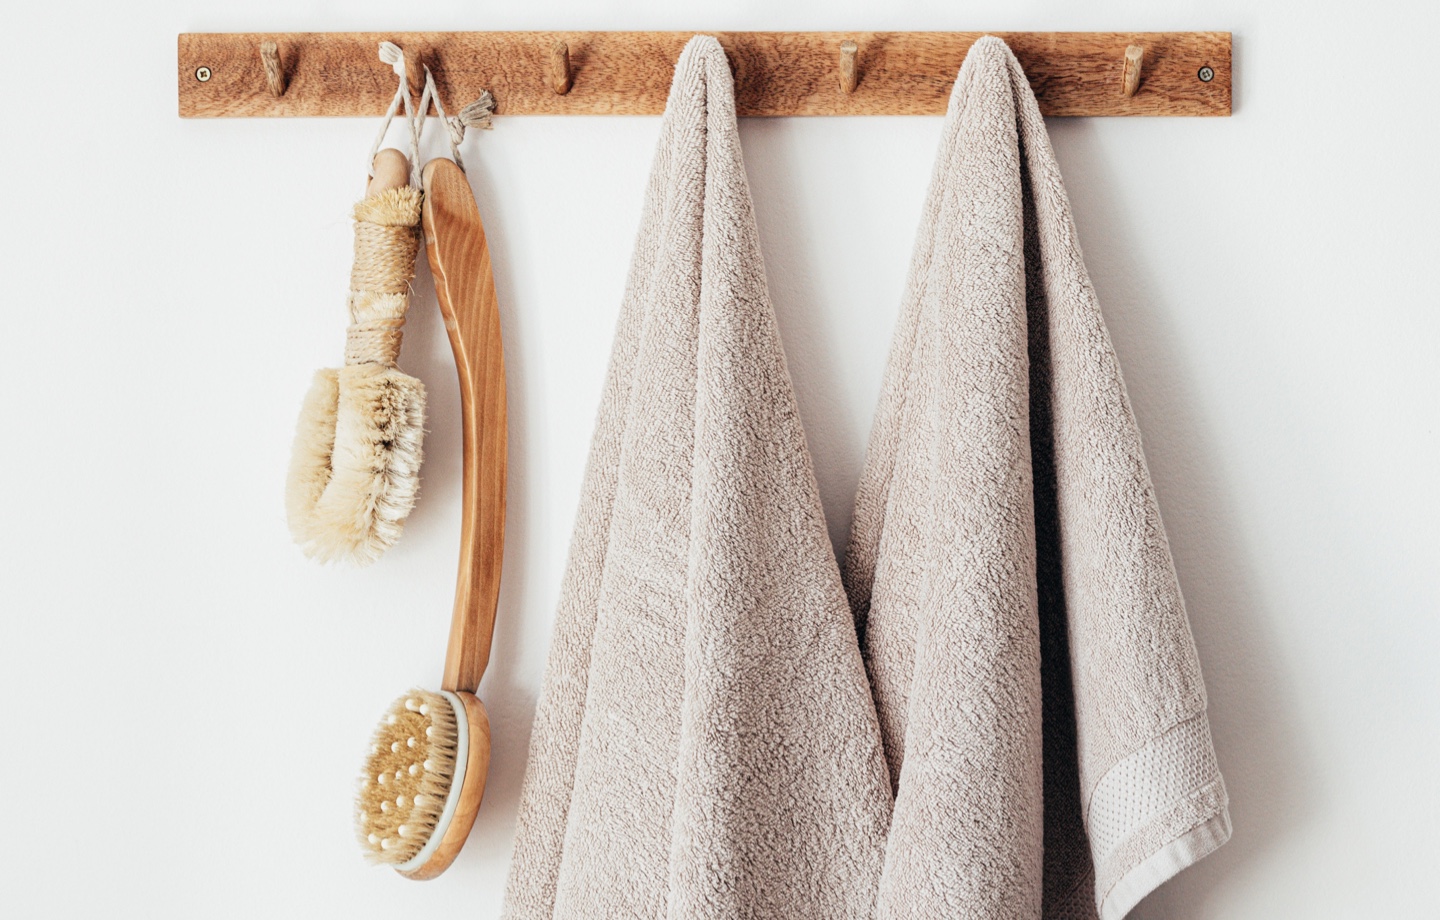 dry brush and towels hanging on rack